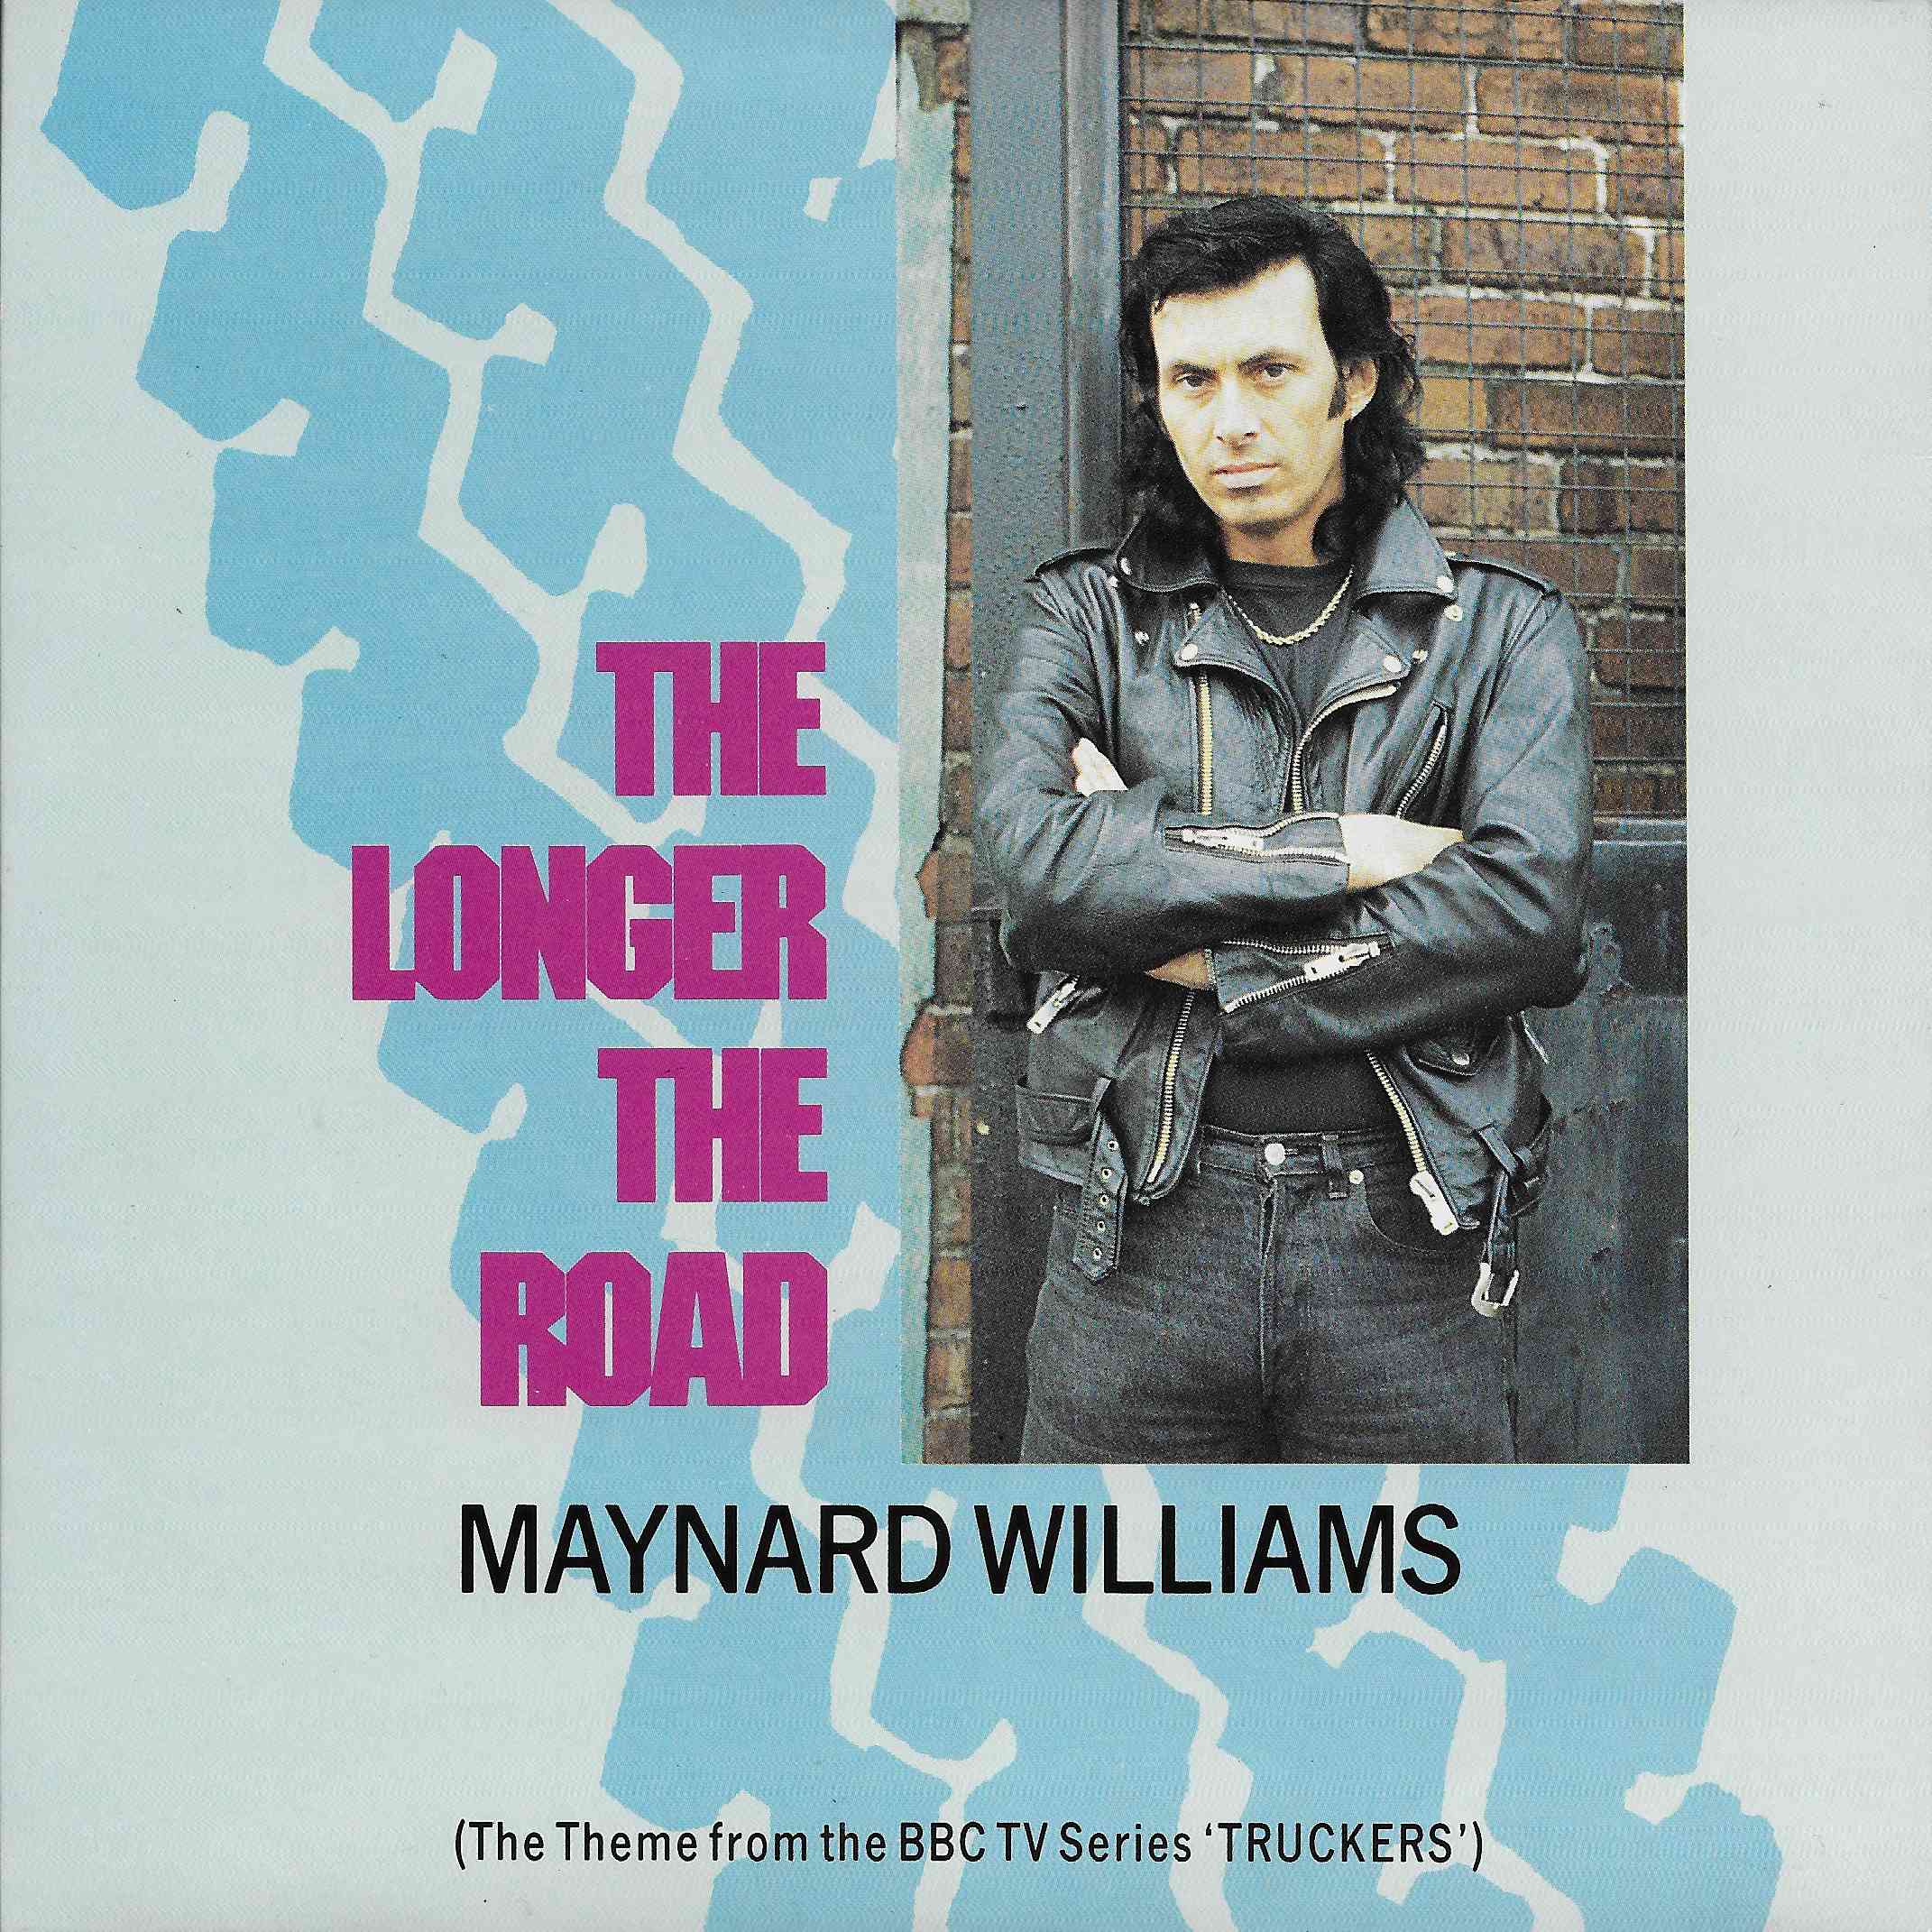 Picture of TEN 195 The longer the road (Theme from Truckers) by artist Maynard Williams from the BBC singles - Records and Tapes library